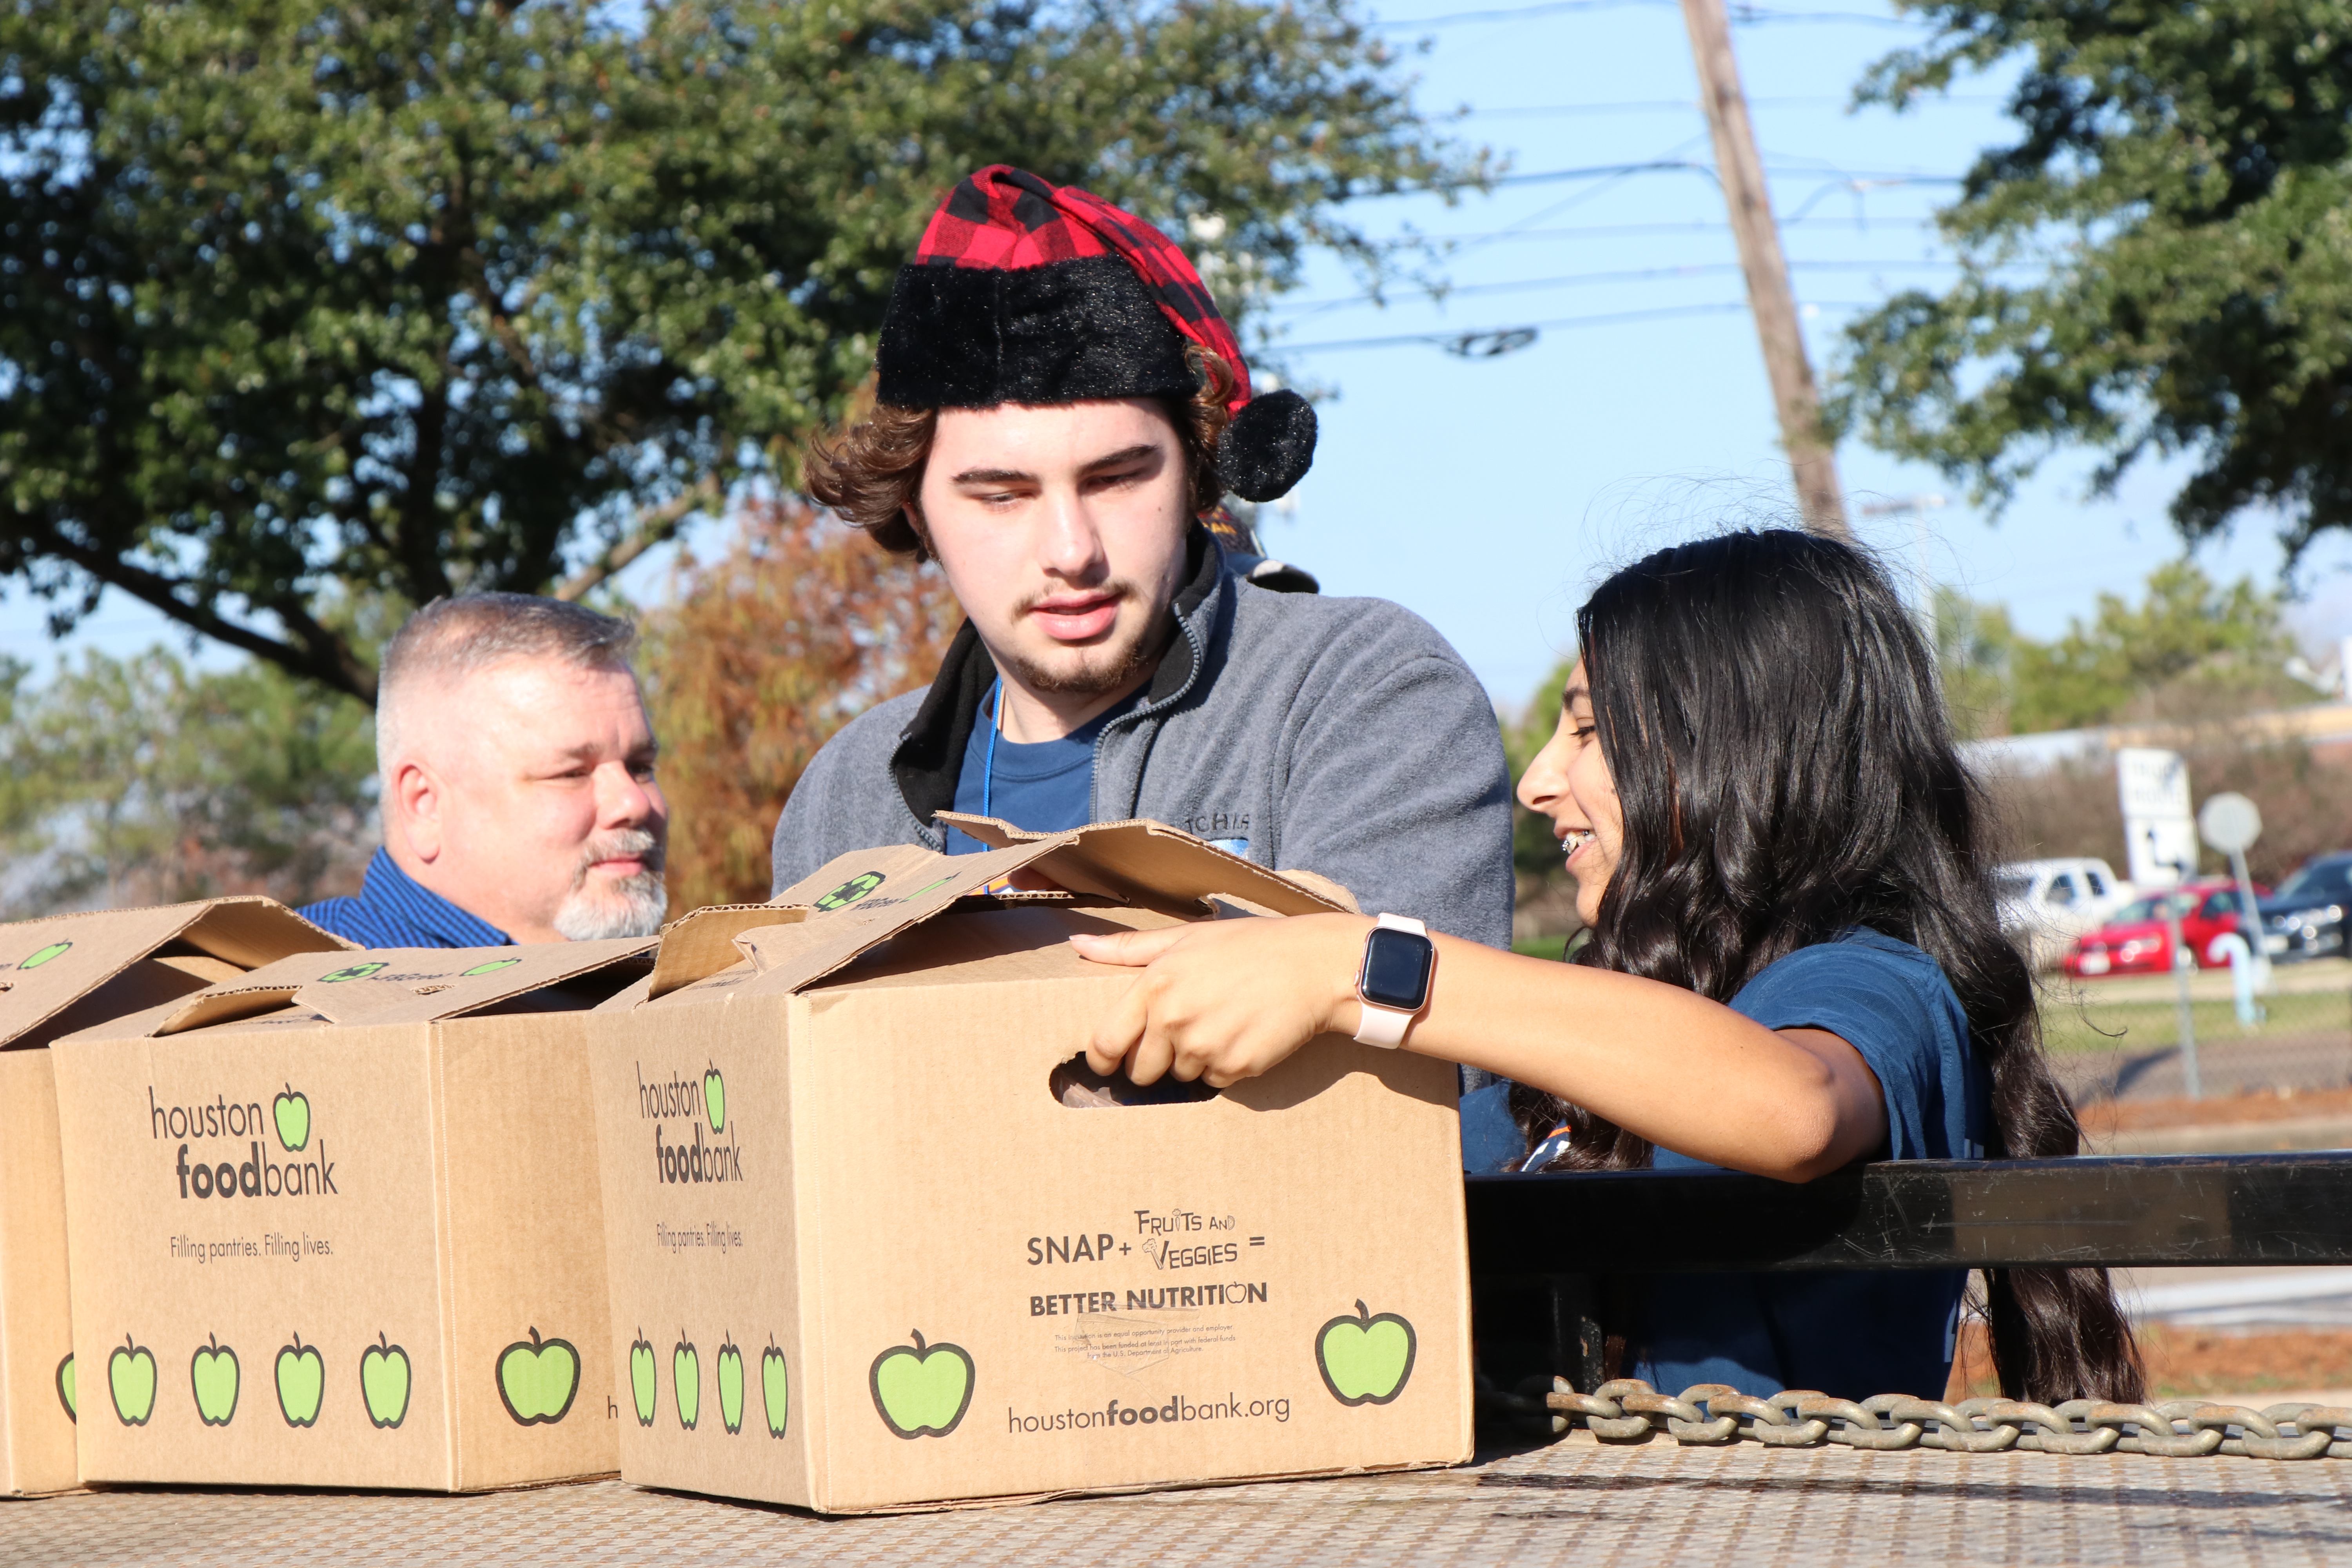 Ross S. Sterling High School PAL, prepare to load boxes of food into a waiting truck